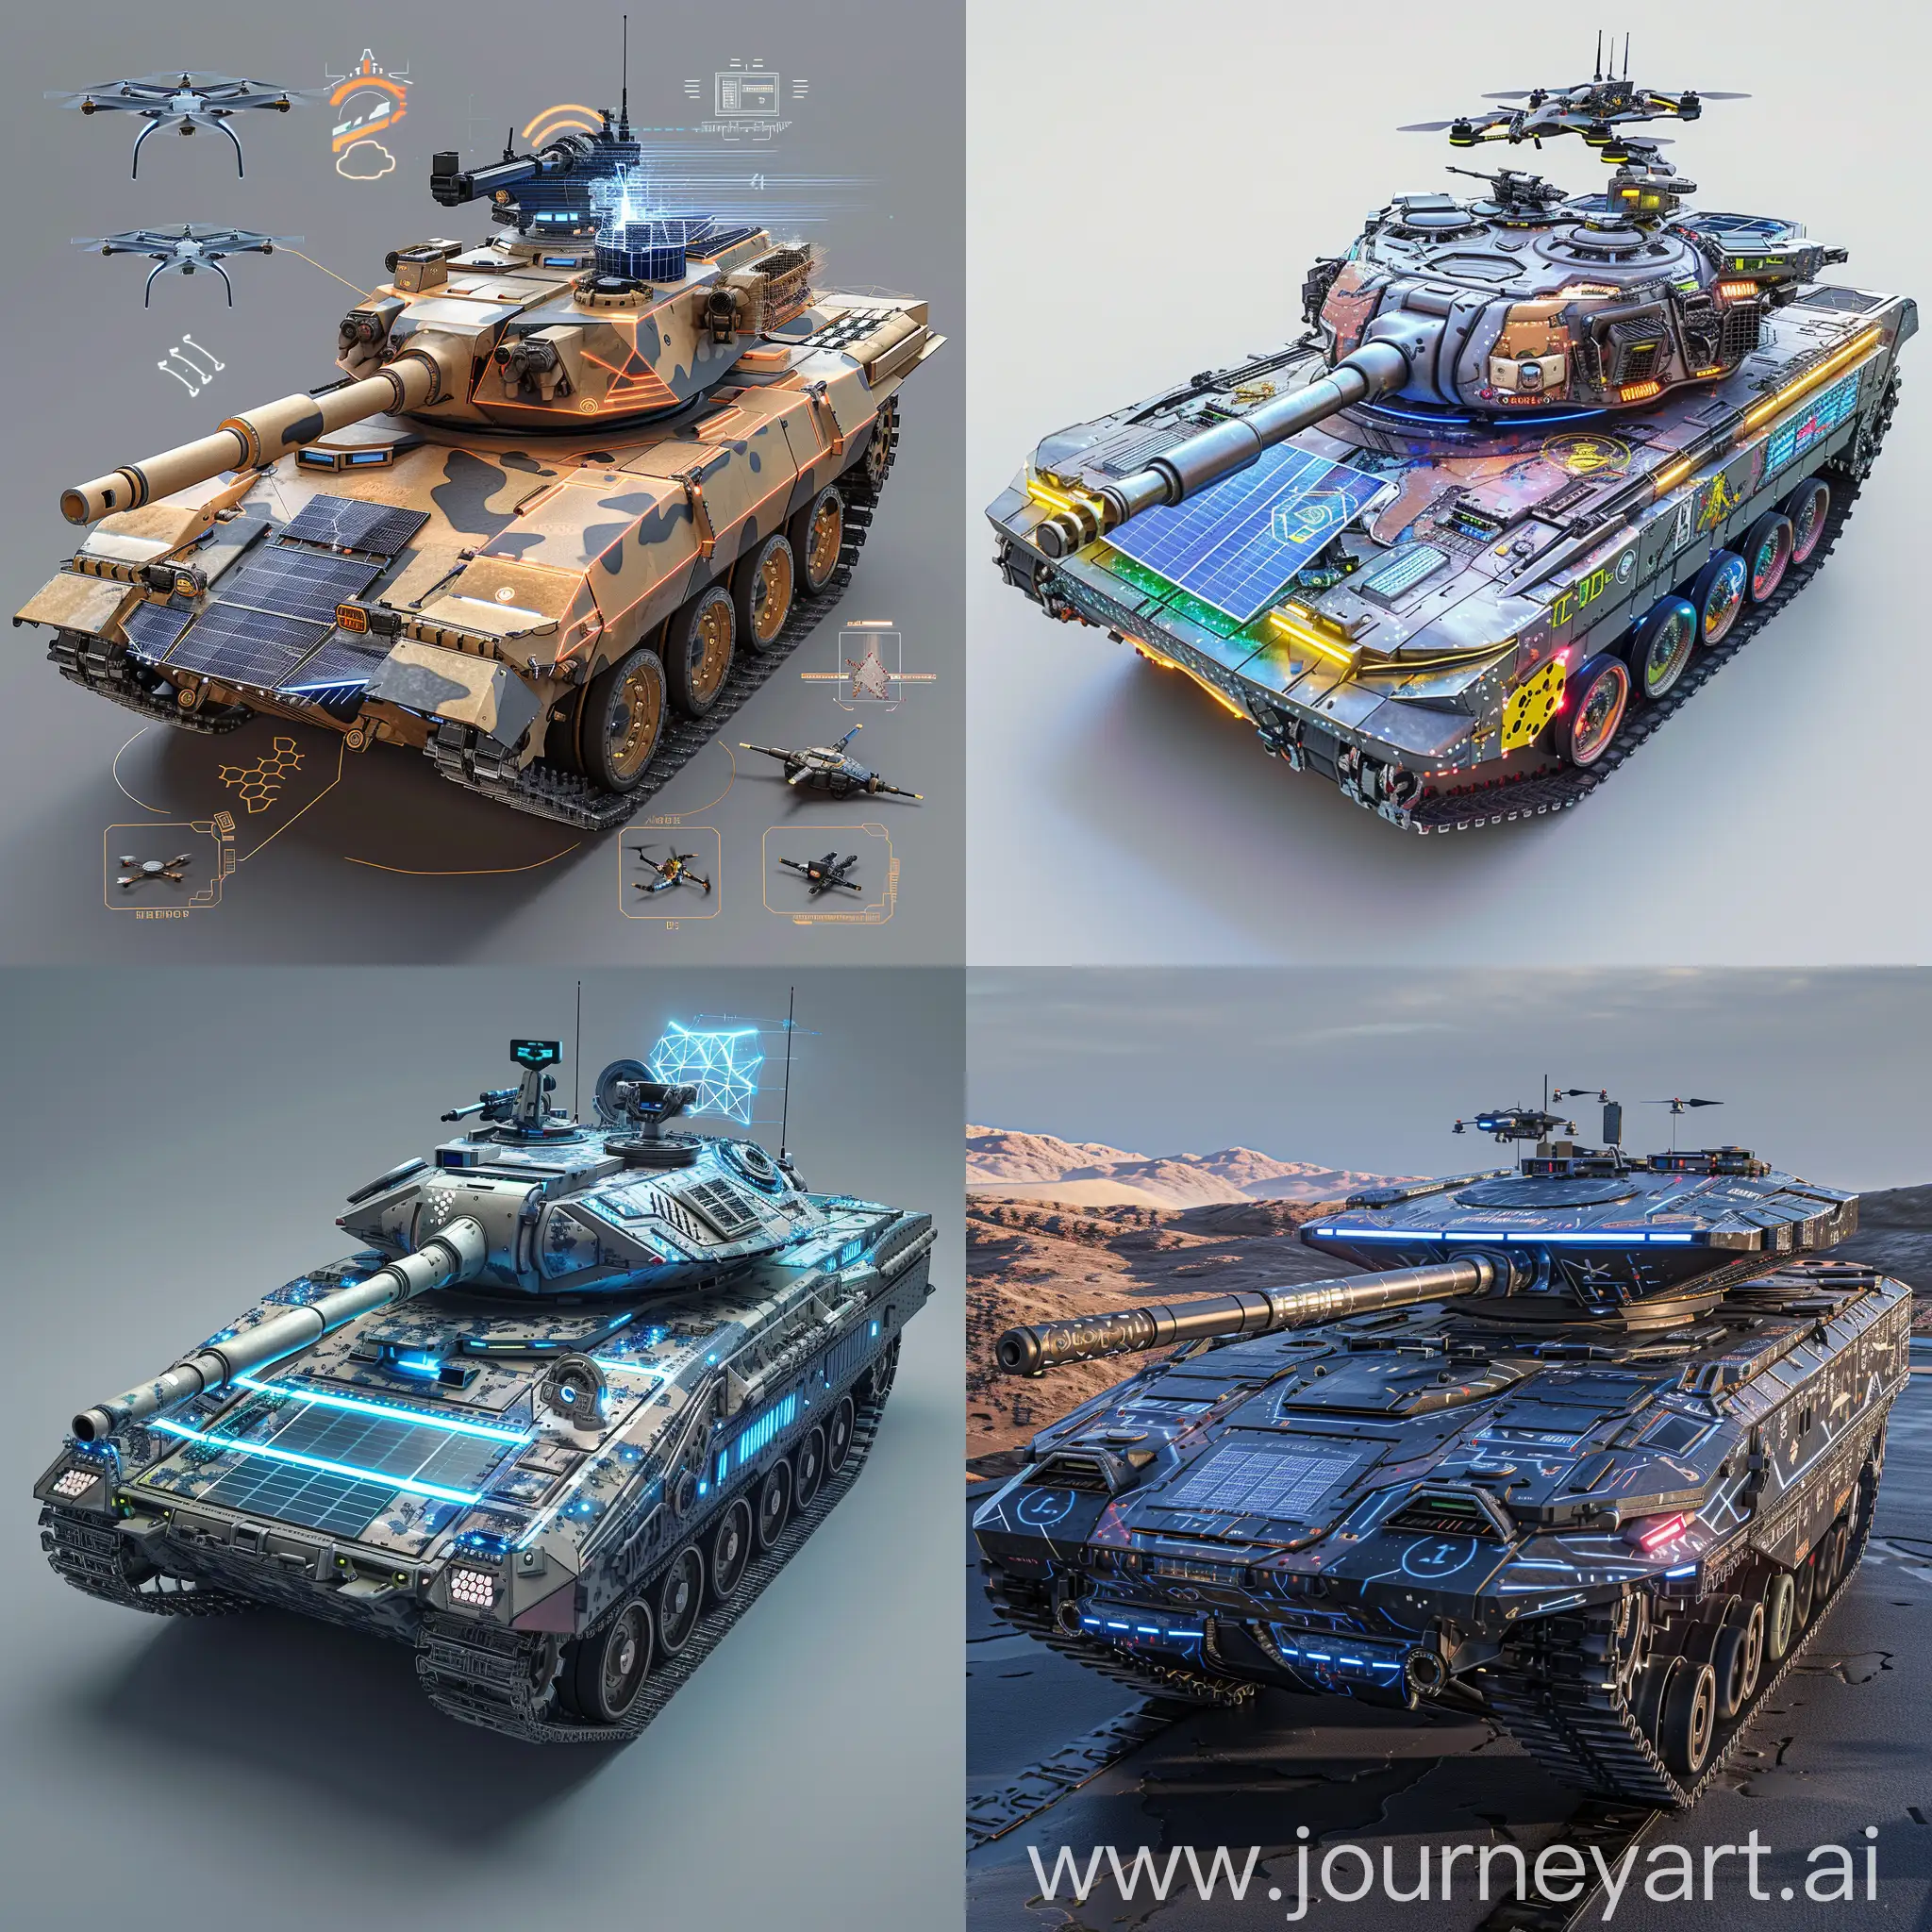 Imaginative futuristic tank, AI-Driven Command System, Quantum Encryption Communication Modules, Integrated AR Interface, Autonomous Navigation Systems, Energy Shields, Drone Deployment Unit, 3D Printing Repair Bay, Neural Interface Controls, Electro-Reactive Armor, Fusion Reactor Power Core, IoT Integration, Cloud Data Access, Cyber Warfare Suite, Blockchain Logistics Tracking, Social Media Intelligence Interface, Big Data Analytics Engine, Remote Control Capability, Virtual Training Simulator, Digital Twin Technology, Holographic Communication Projectors, Adaptive Camouflage Skin, Solar Panel Armor, Unmanned Turret Systems, Electromagnetic Railgun, Laser Defense System, Active Protection System (APS), Robotic Repair Arms, Missile Intercept Drones, Multi-Terrain Tread Adaptation, Atmospheric Water Generator, Networked Sensor Array, Networked Sensor Array, Wi-Fi Signal Jammer, Holographic Display Panels, RFID Tagged Ammunition, External Hardpoints for Modular Upgrades, Drone Control Hub, Digital Graffiti Projectors, Smart Armor, 3D Mapping Projectors, unreal engine 5 --stylize 1000